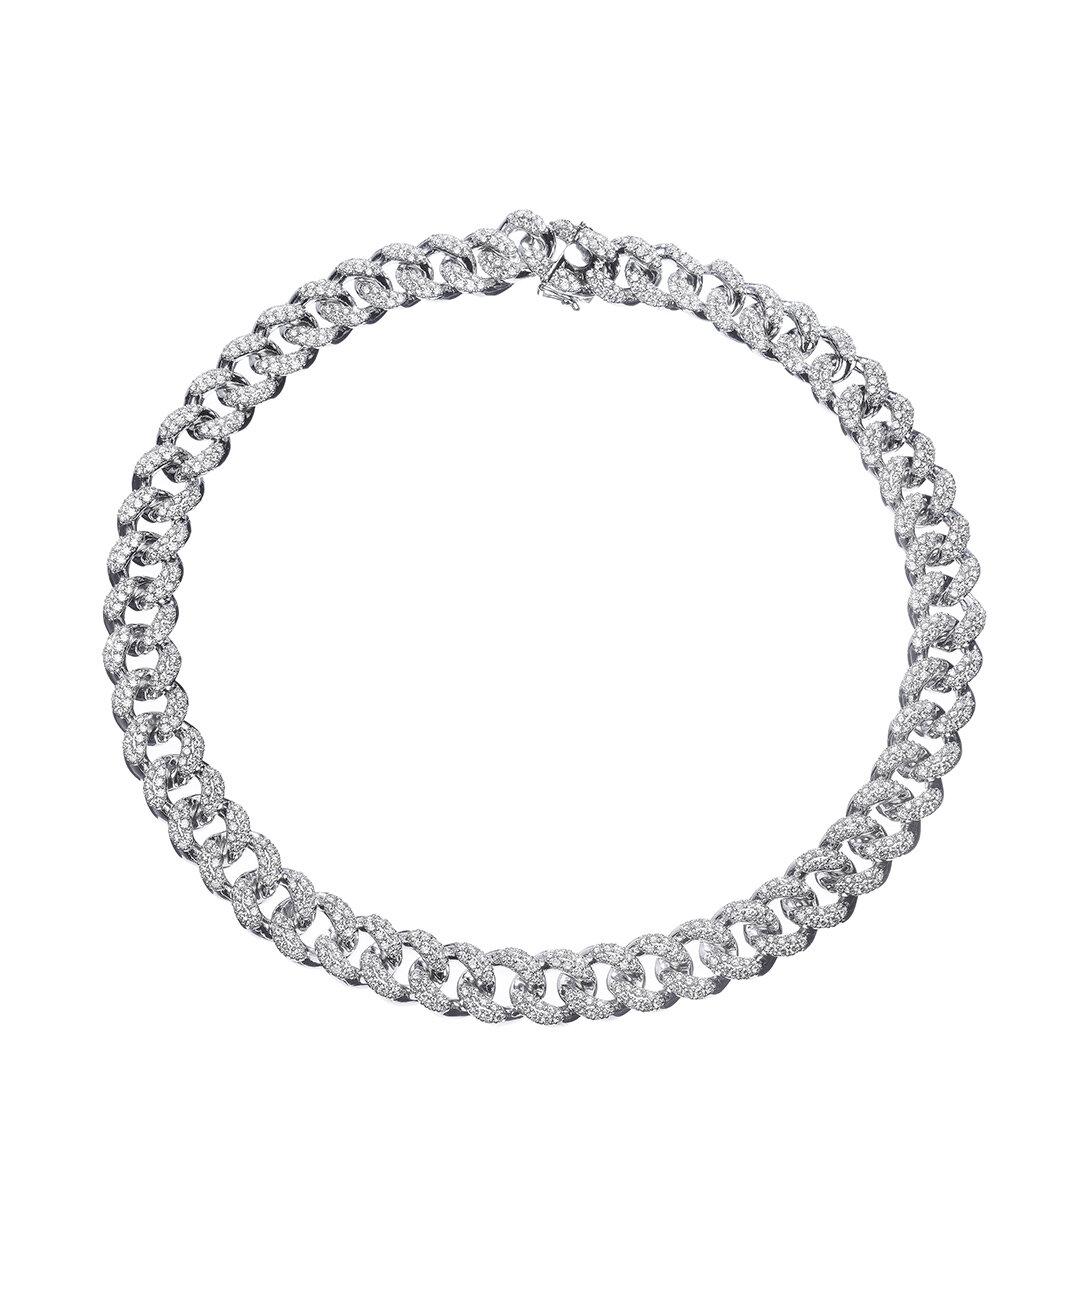 PANIM 20 Carat Pave set Diamond 18K White Gold Cuban Necklace

Wearing a diamond Cuban chain is a great way to elevate your style and make a statement. A diamond Cuban chain can be worn on its own as a statement piece, or layered with other